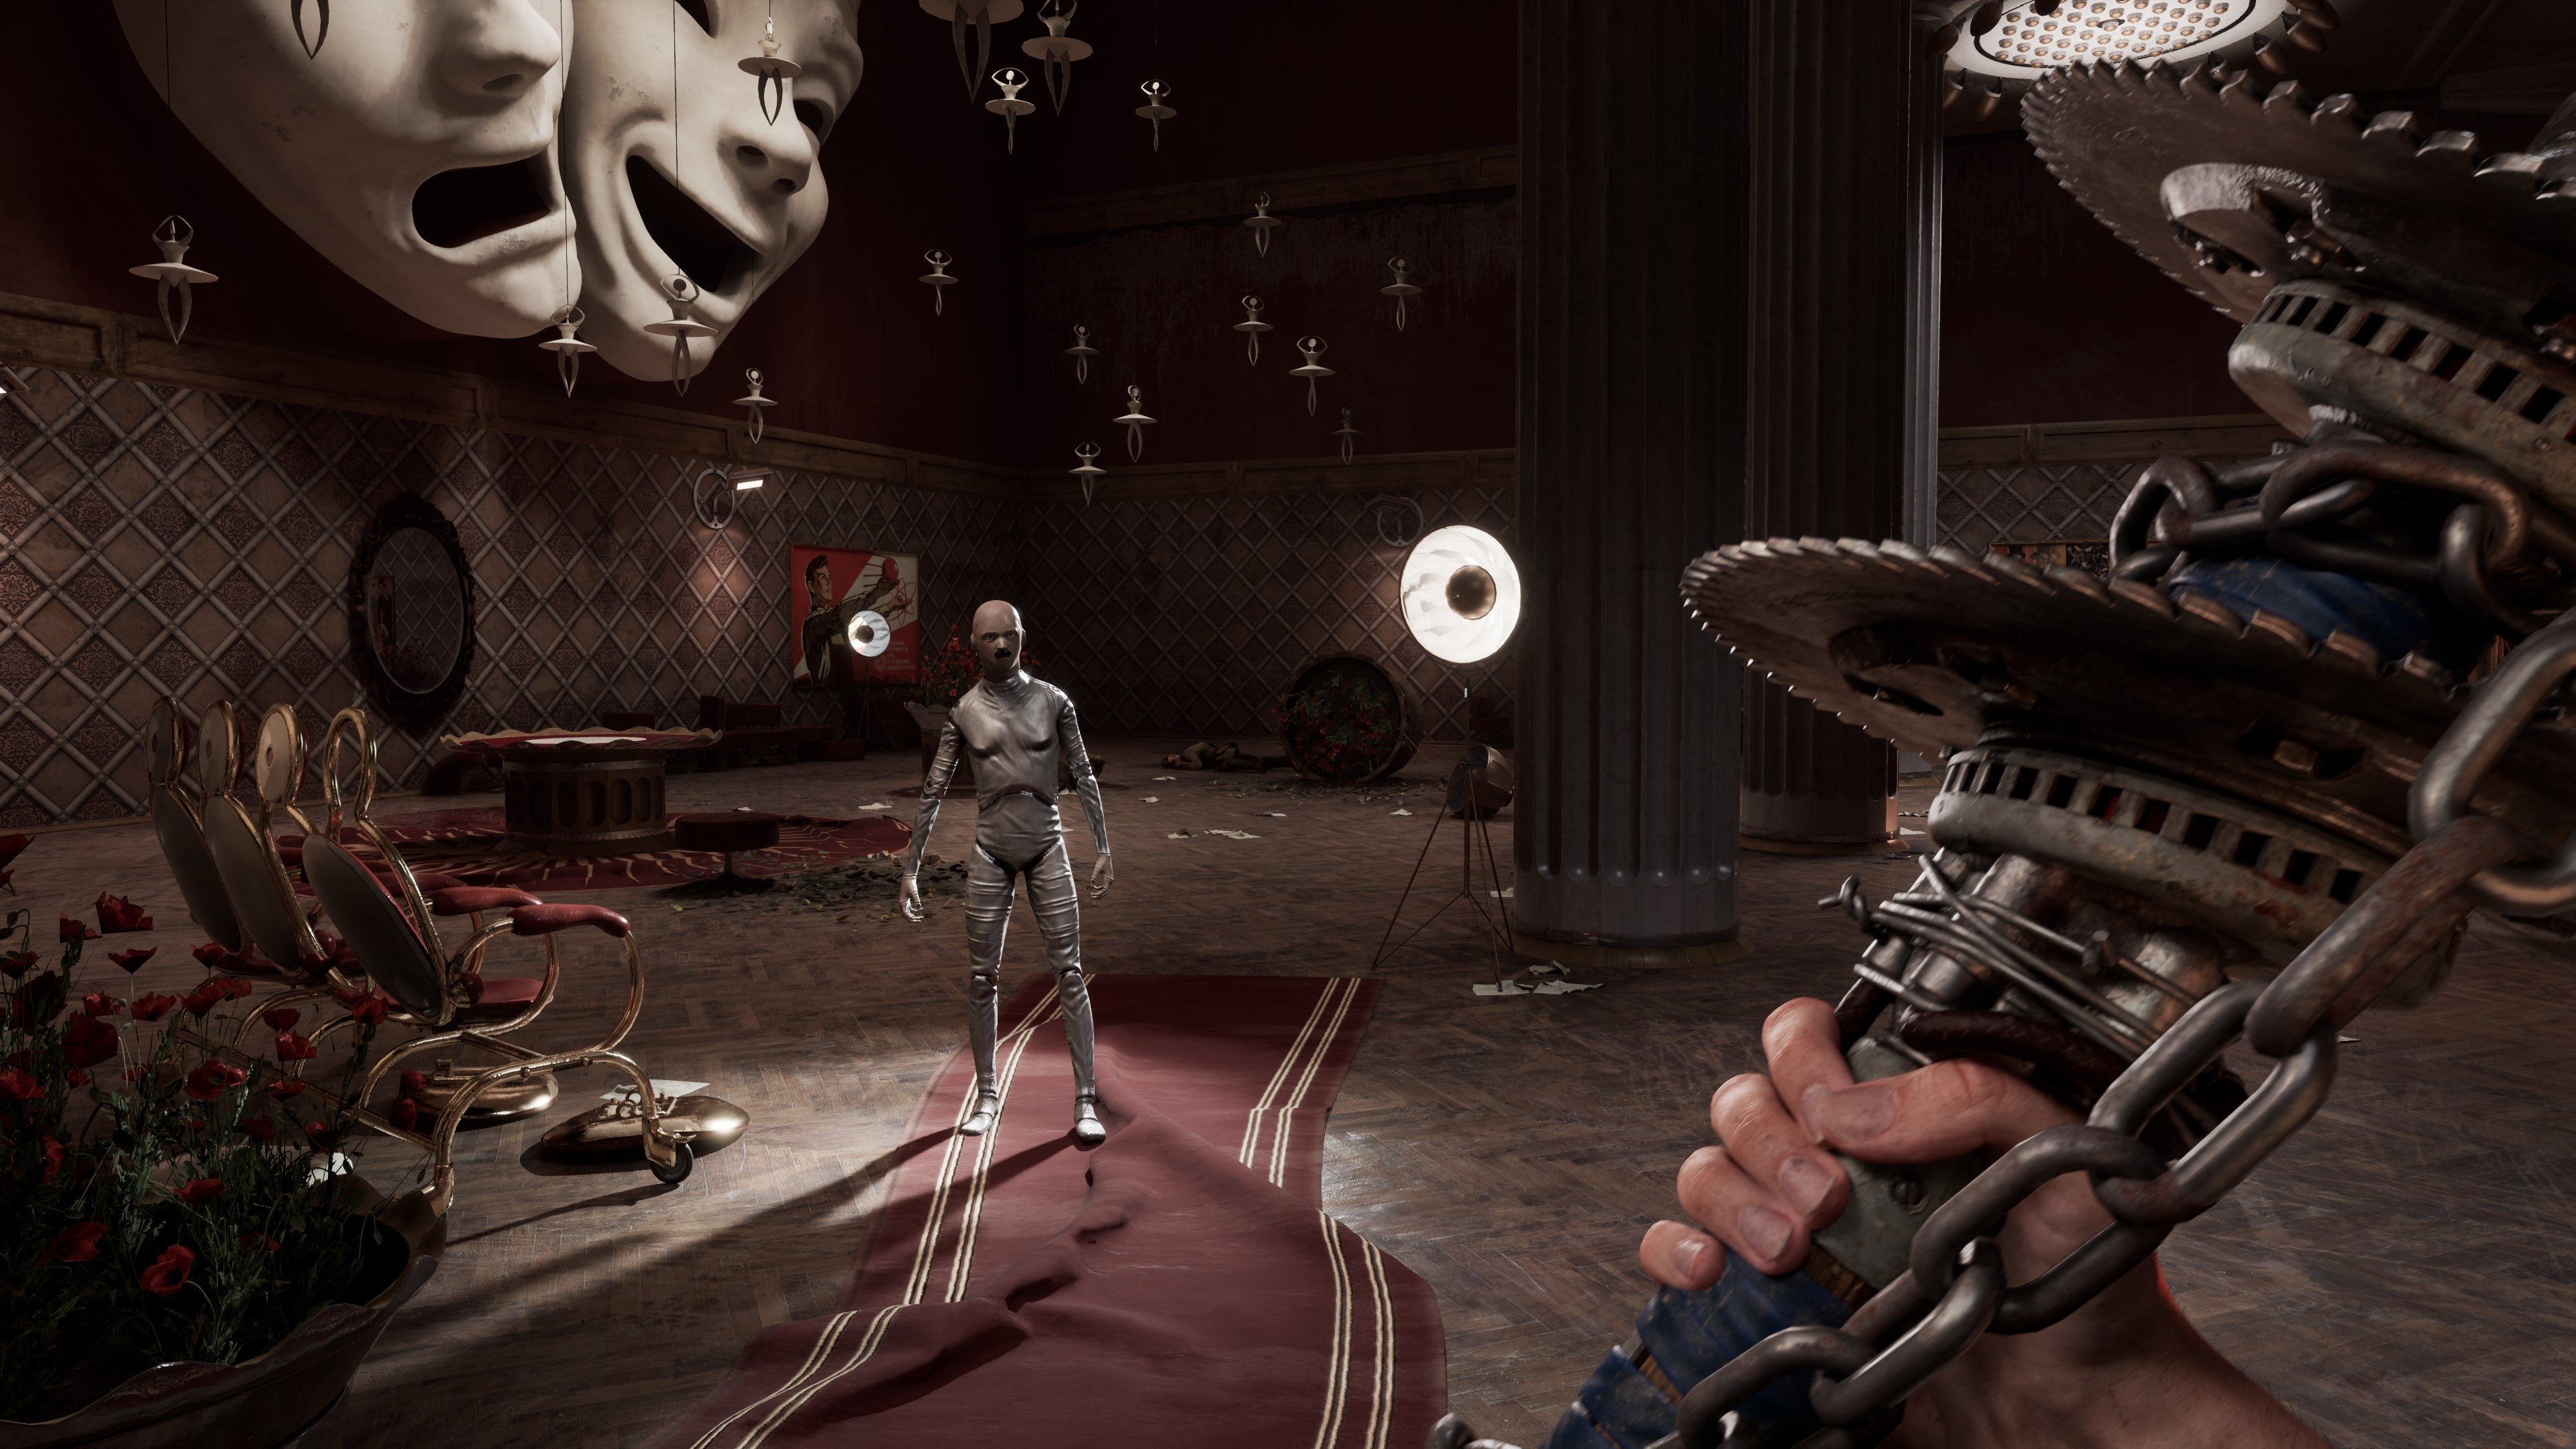 A screenshot from Atomic Heart which shows the player confronting a hostile android with a makeshift saw/club weapon.